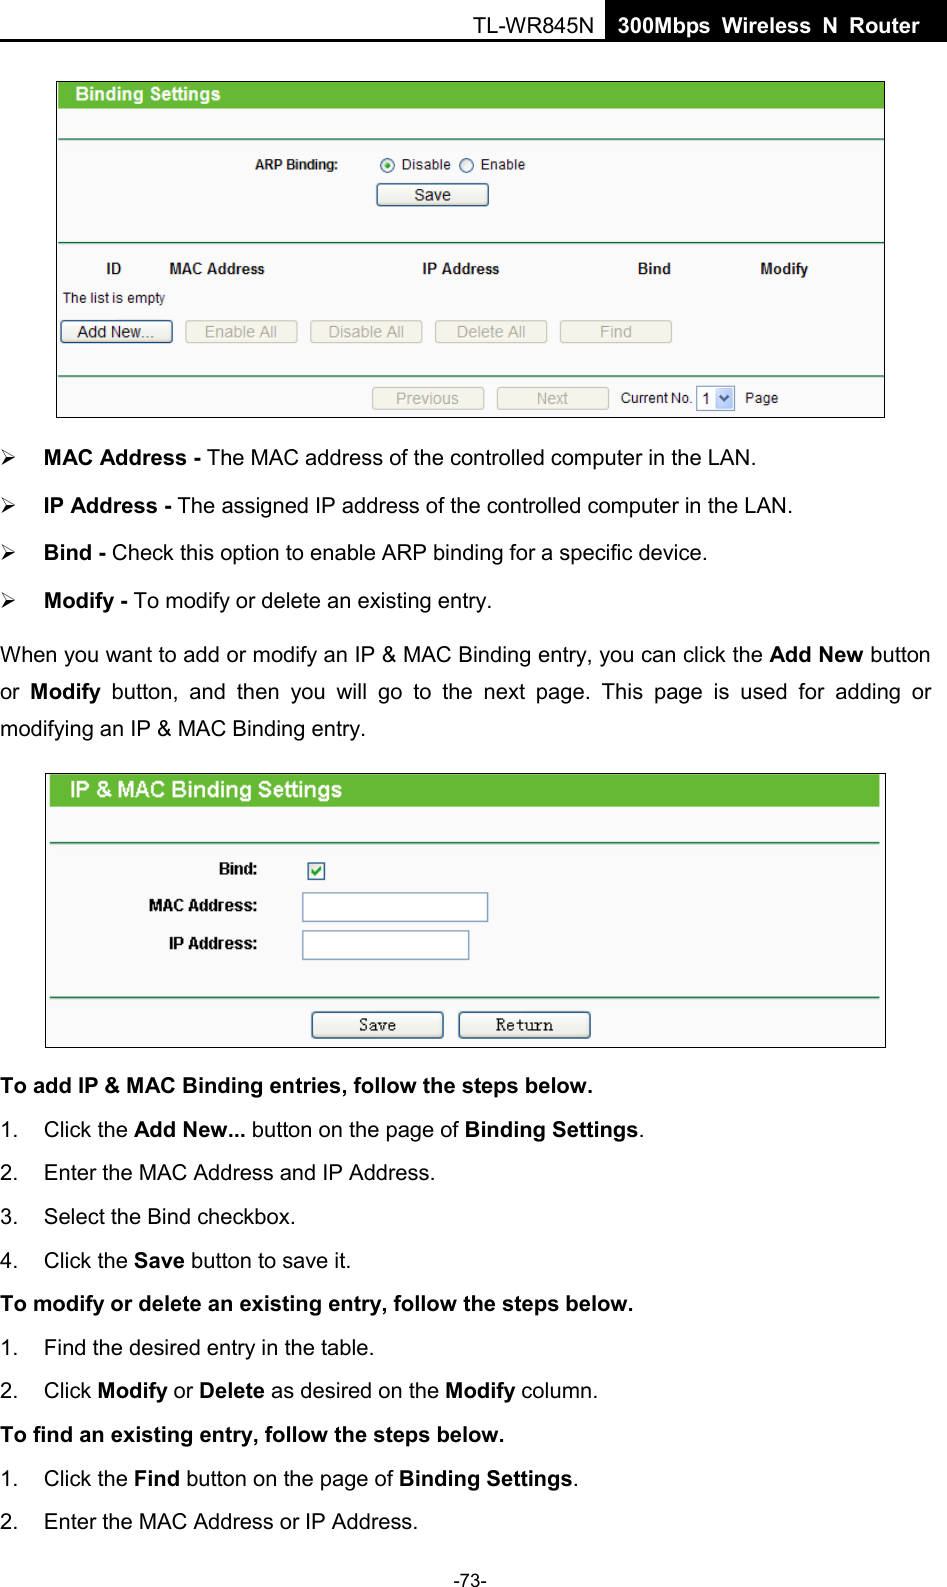  TL-WR845N  300Mbps Wireless N Router      MAC Address - The MAC address of the controlled computer in the LAN.    IP Address - The assigned IP address of the controlled computer in the LAN.    Bind - Check this option to enable ARP binding for a specific device.    Modify - To modify or delete an existing entry.   When you want to add or modify an IP &amp; MAC Binding entry, you can click the Add New button or  Modify button, and then you will go to the next page. This page is used for adding or modifying an IP &amp; MAC Binding entry.    To add IP &amp; MAC Binding entries, follow the steps below. 1. Click the Add New... button on the page of Binding Settings.   2. Enter the MAC Address and IP Address. 3. Select the Bind checkbox.   4. Click the Save button to save it. To modify or delete an existing entry, follow the steps below. 1. Find the desired entry in the table.   2. Click Modify or Delete as desired on the Modify column.   To find an existing entry, follow the steps below. 1. Click the Find button on the page of Binding Settings. 2. Enter the MAC Address or IP Address. -73- 